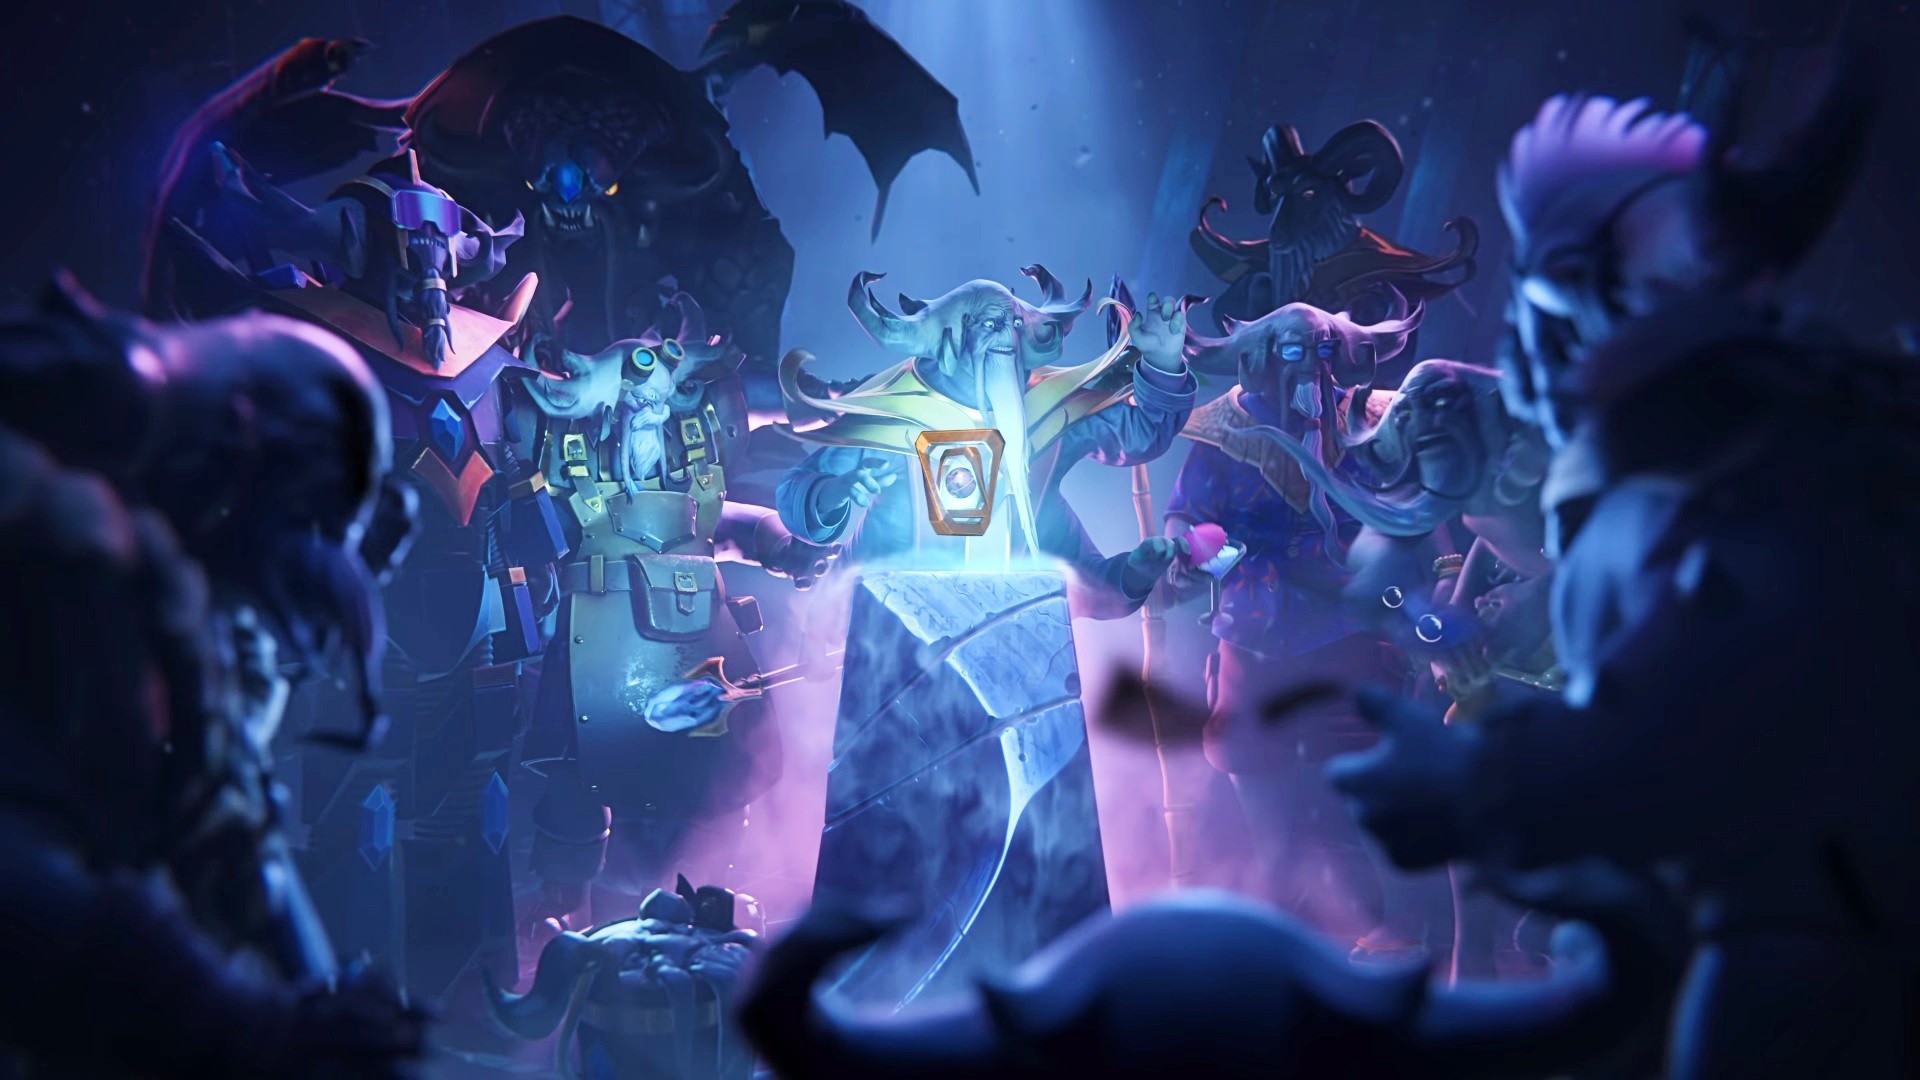 Dota 2’s Aghanim’s Labyrinth mode is back with a new battle pass